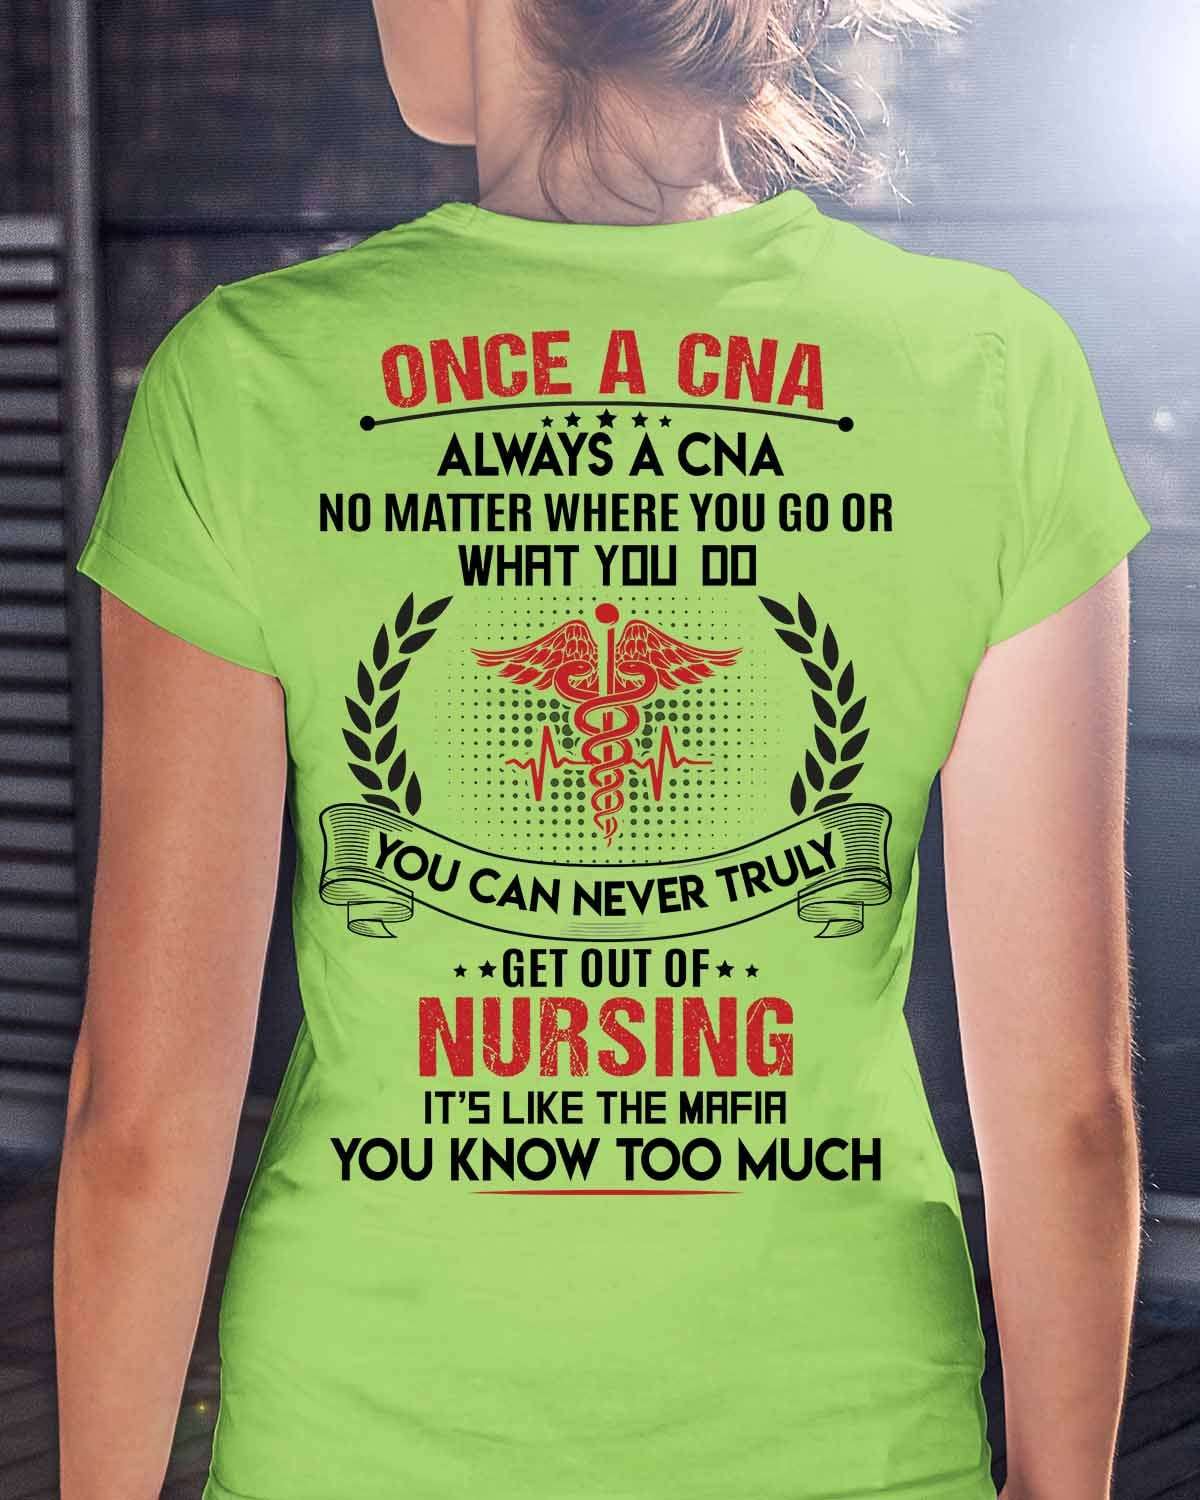 Once a cna always a cna no matter where you go or what you do get out of nursing